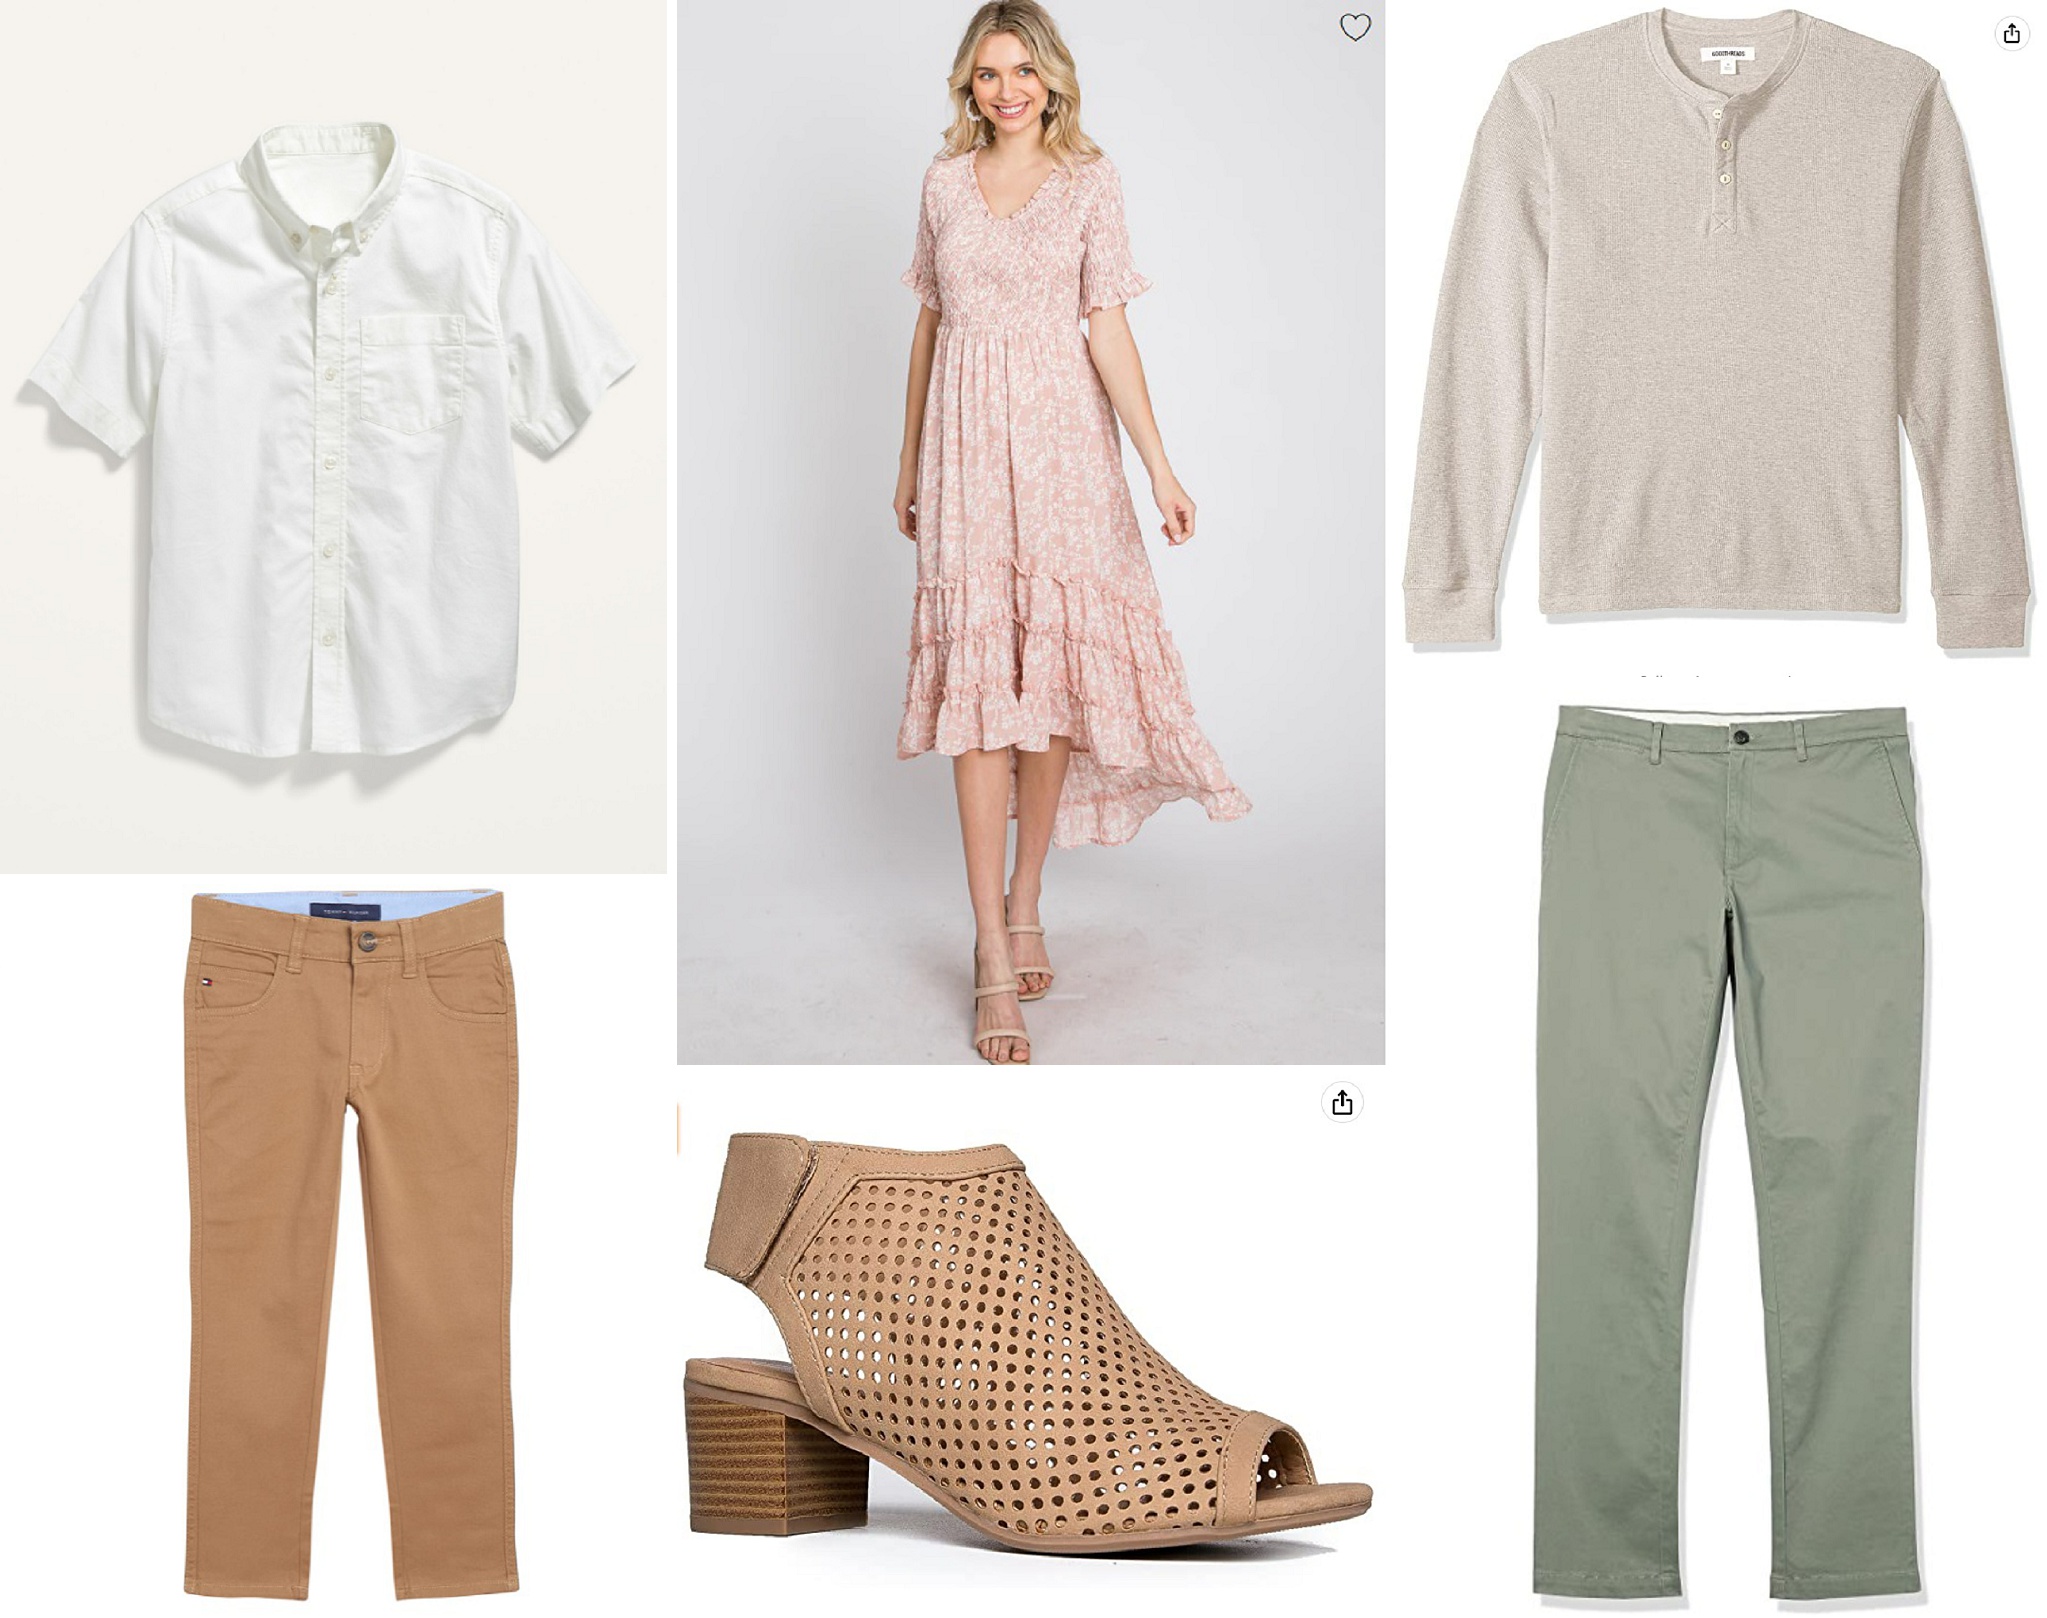 neutral outfits with oatmeal, blush, and olive for spring family picture outfit inspiration